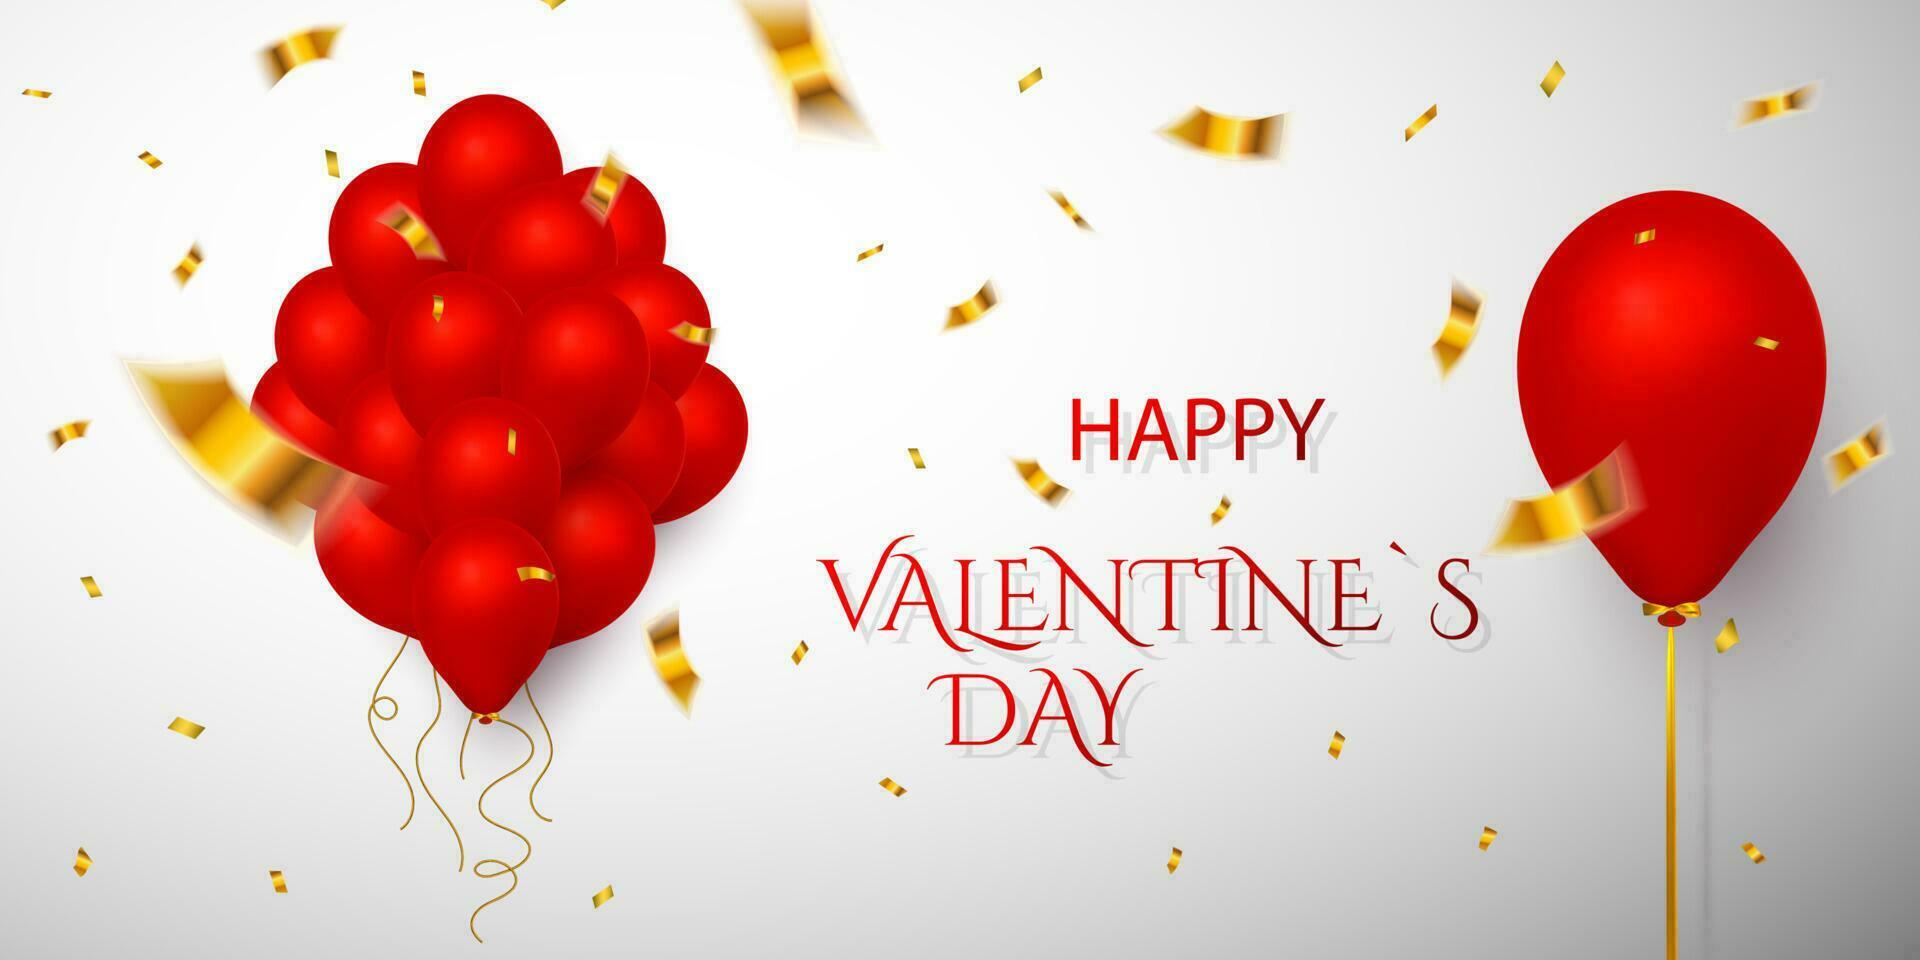 Happy Valentines Day. Red balloon on white background with shadow and confetti. Festival decoration. Vector illustration